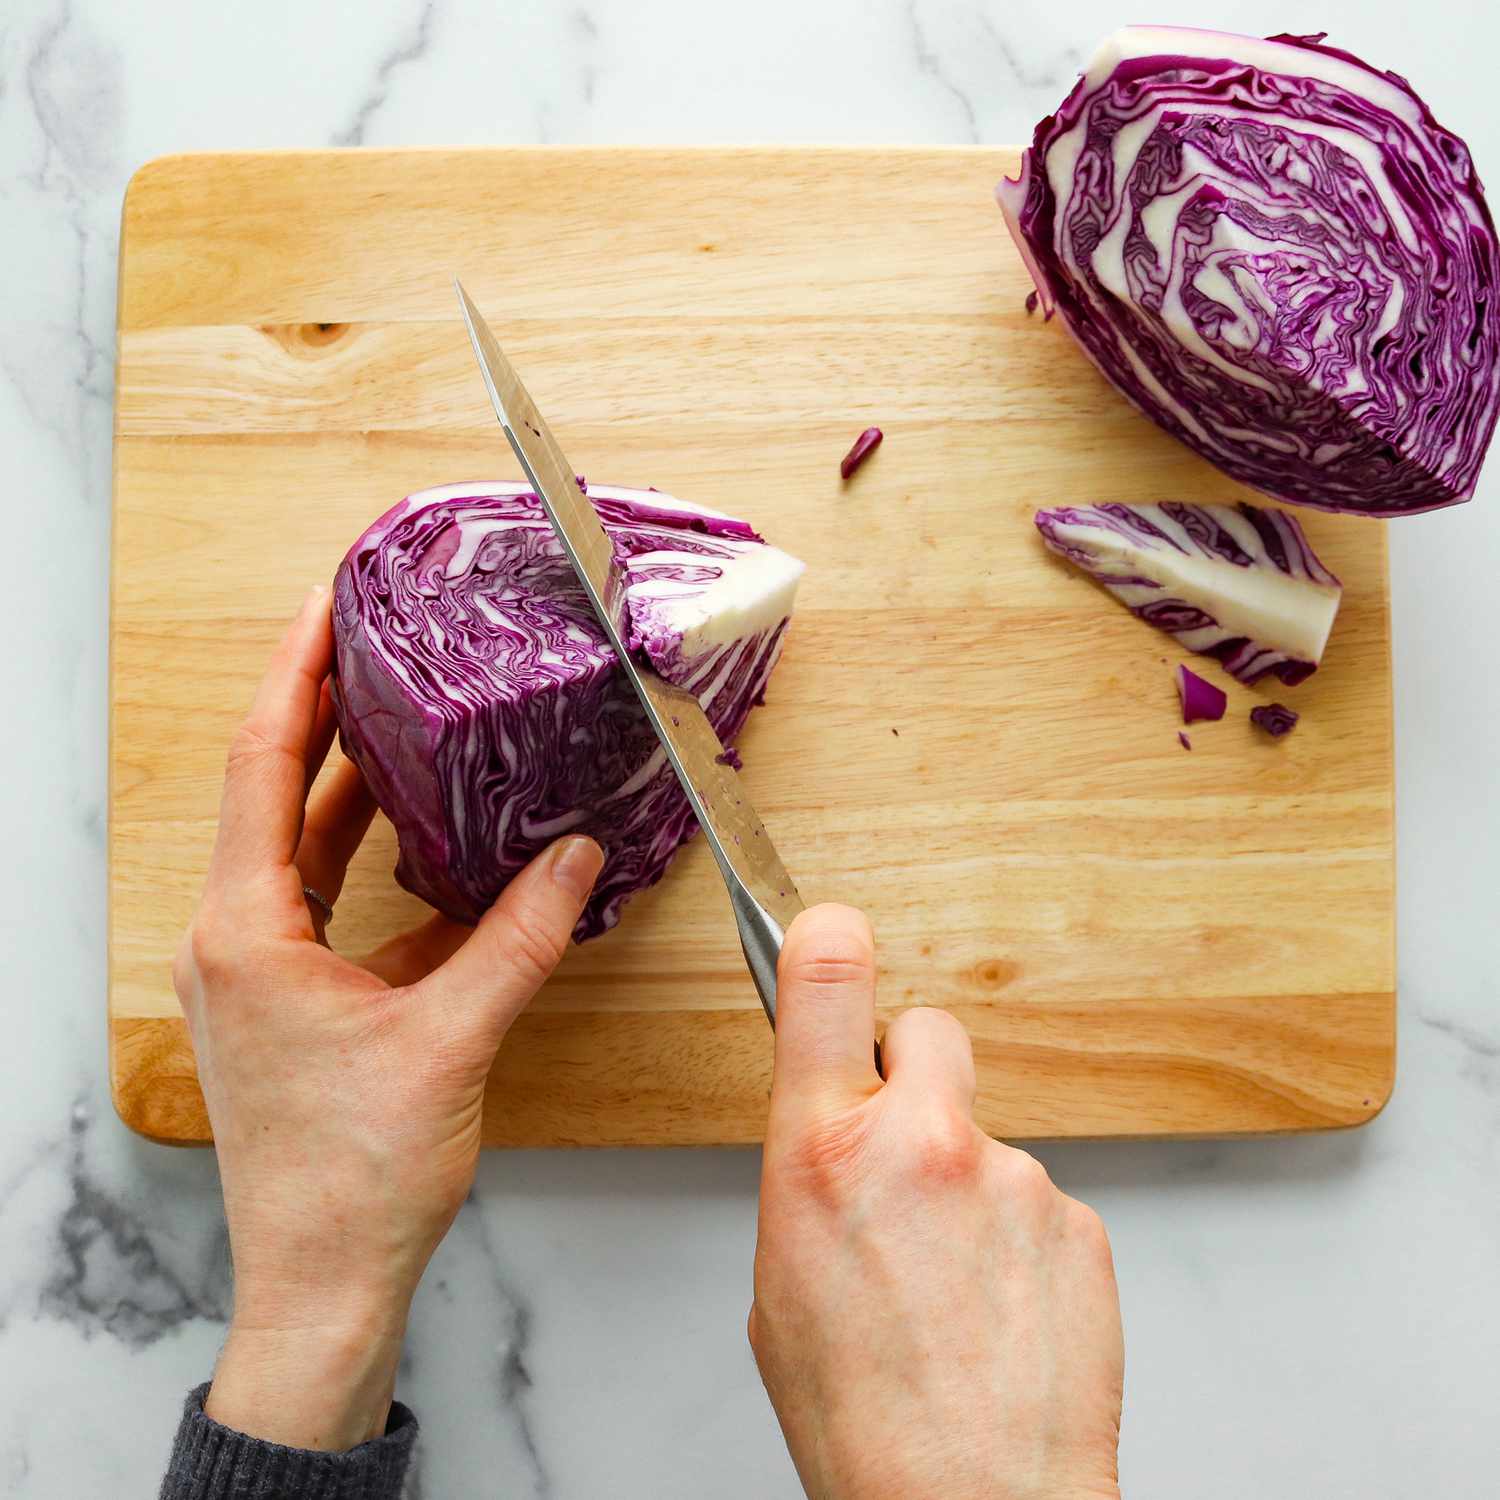 Close up of cutting the core off a quarter of a head of purple cabbage